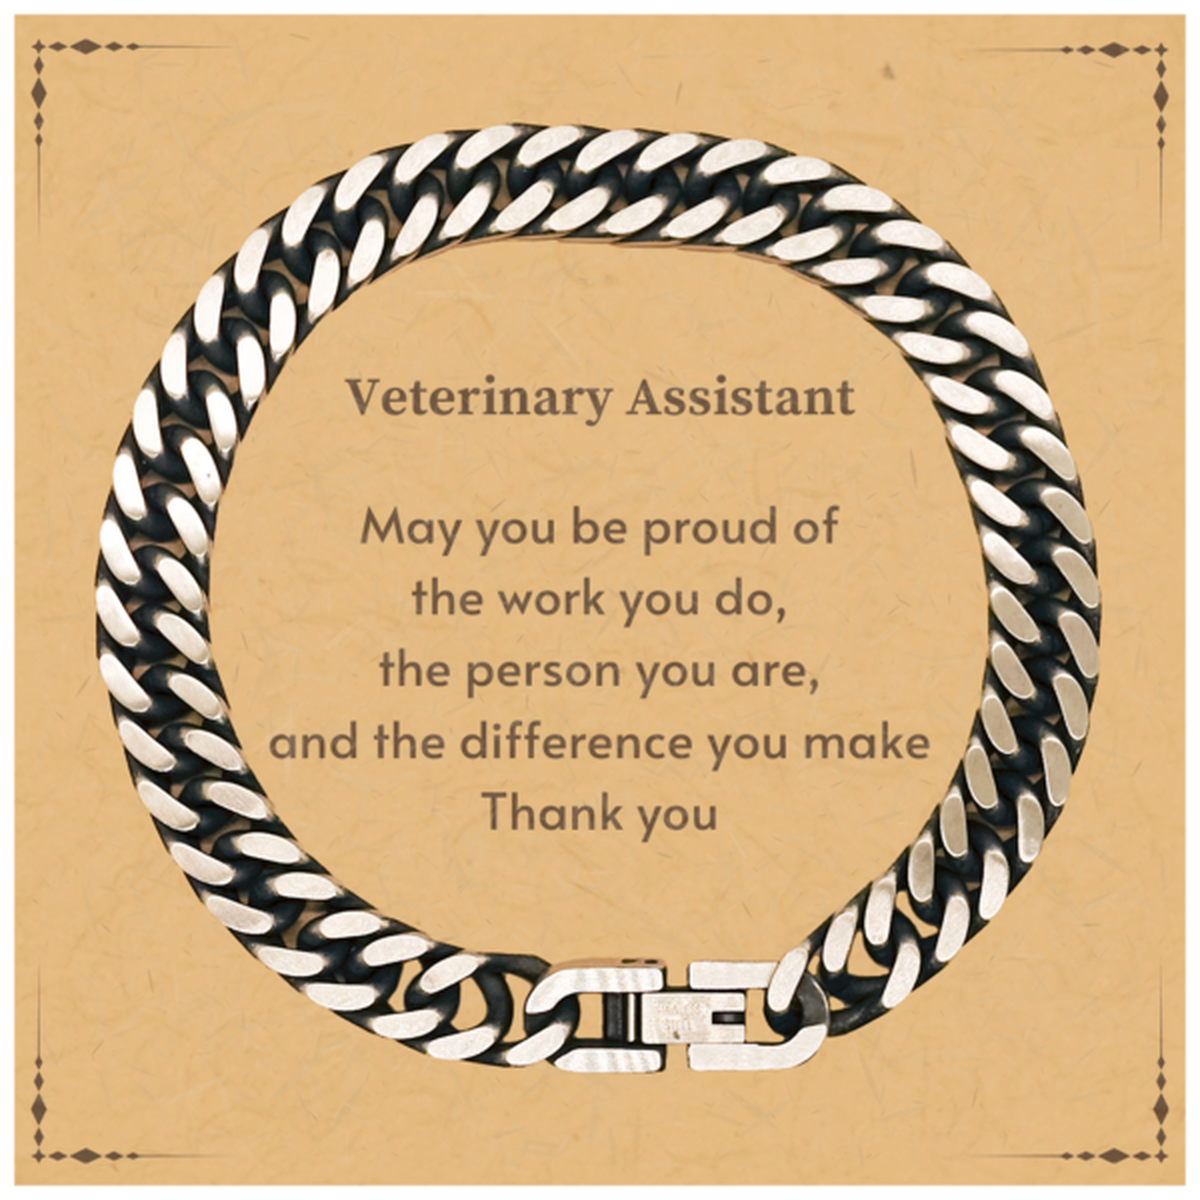 Heartwarming Cuban Link Chain Bracelet Retirement Coworkers Gifts for Veterinary Assistant, Veterinary Assistant May You be proud of the work you do, the person you are Gifts for Boss Men Women Friends